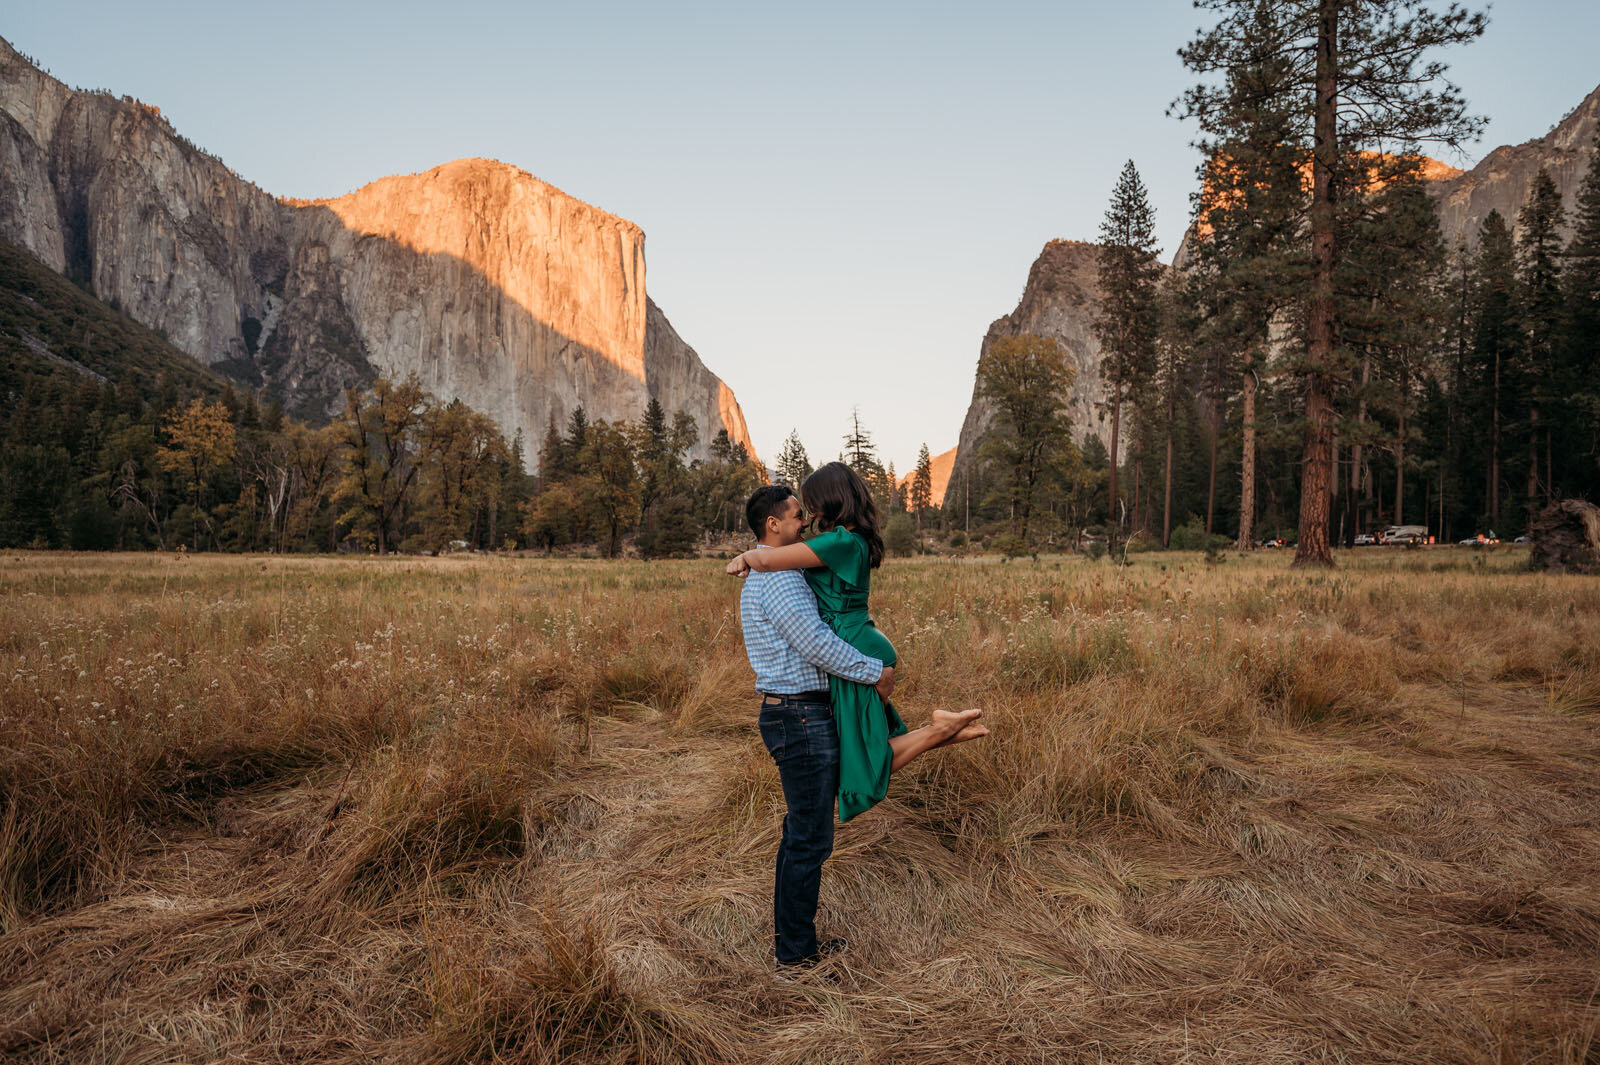 Couple in Yosemite captured by Emily Jenks